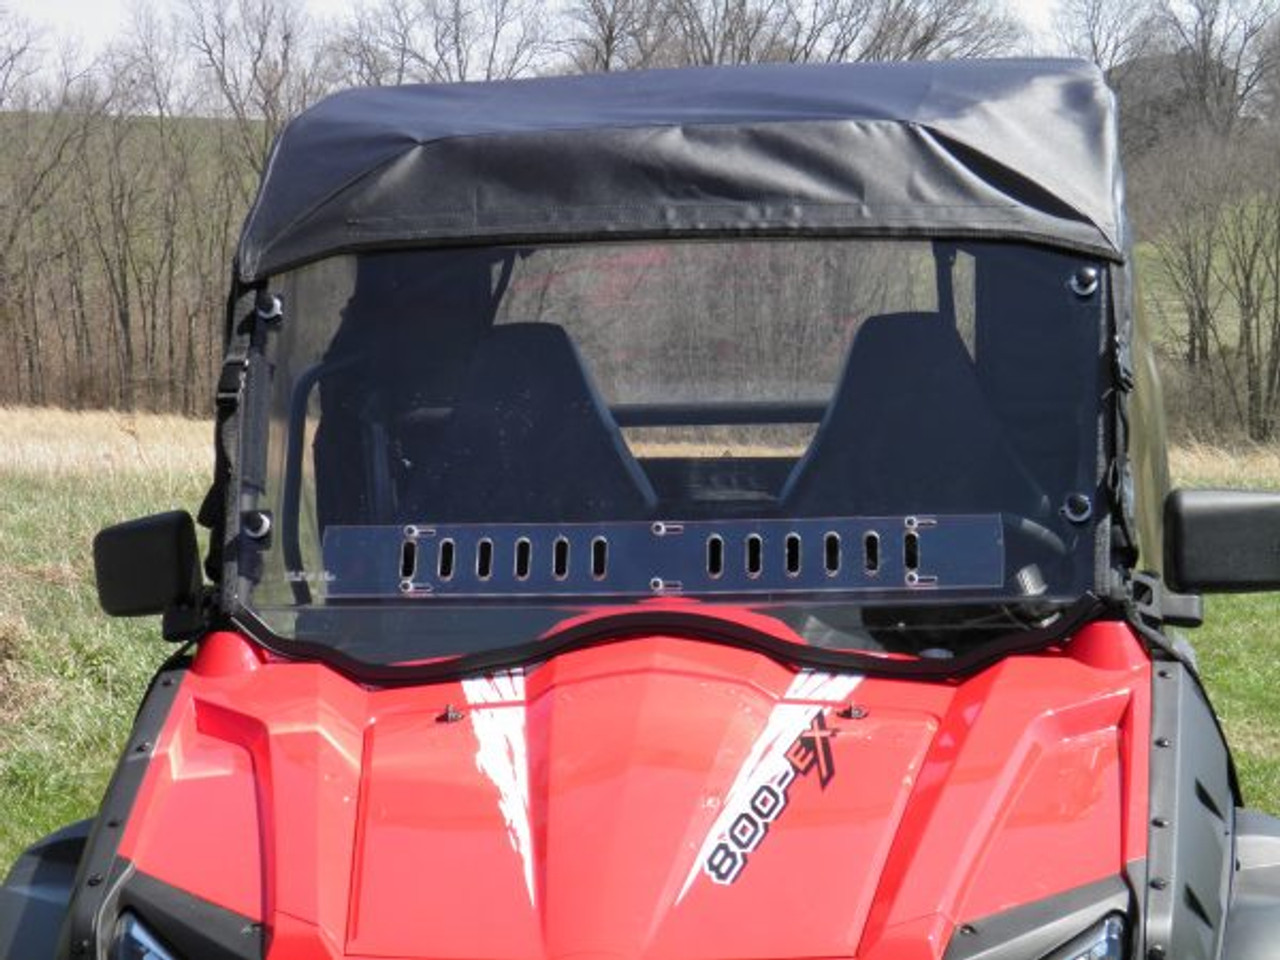 33 Star side x side Z-Force 500 800 800ex 1000 windshield front view